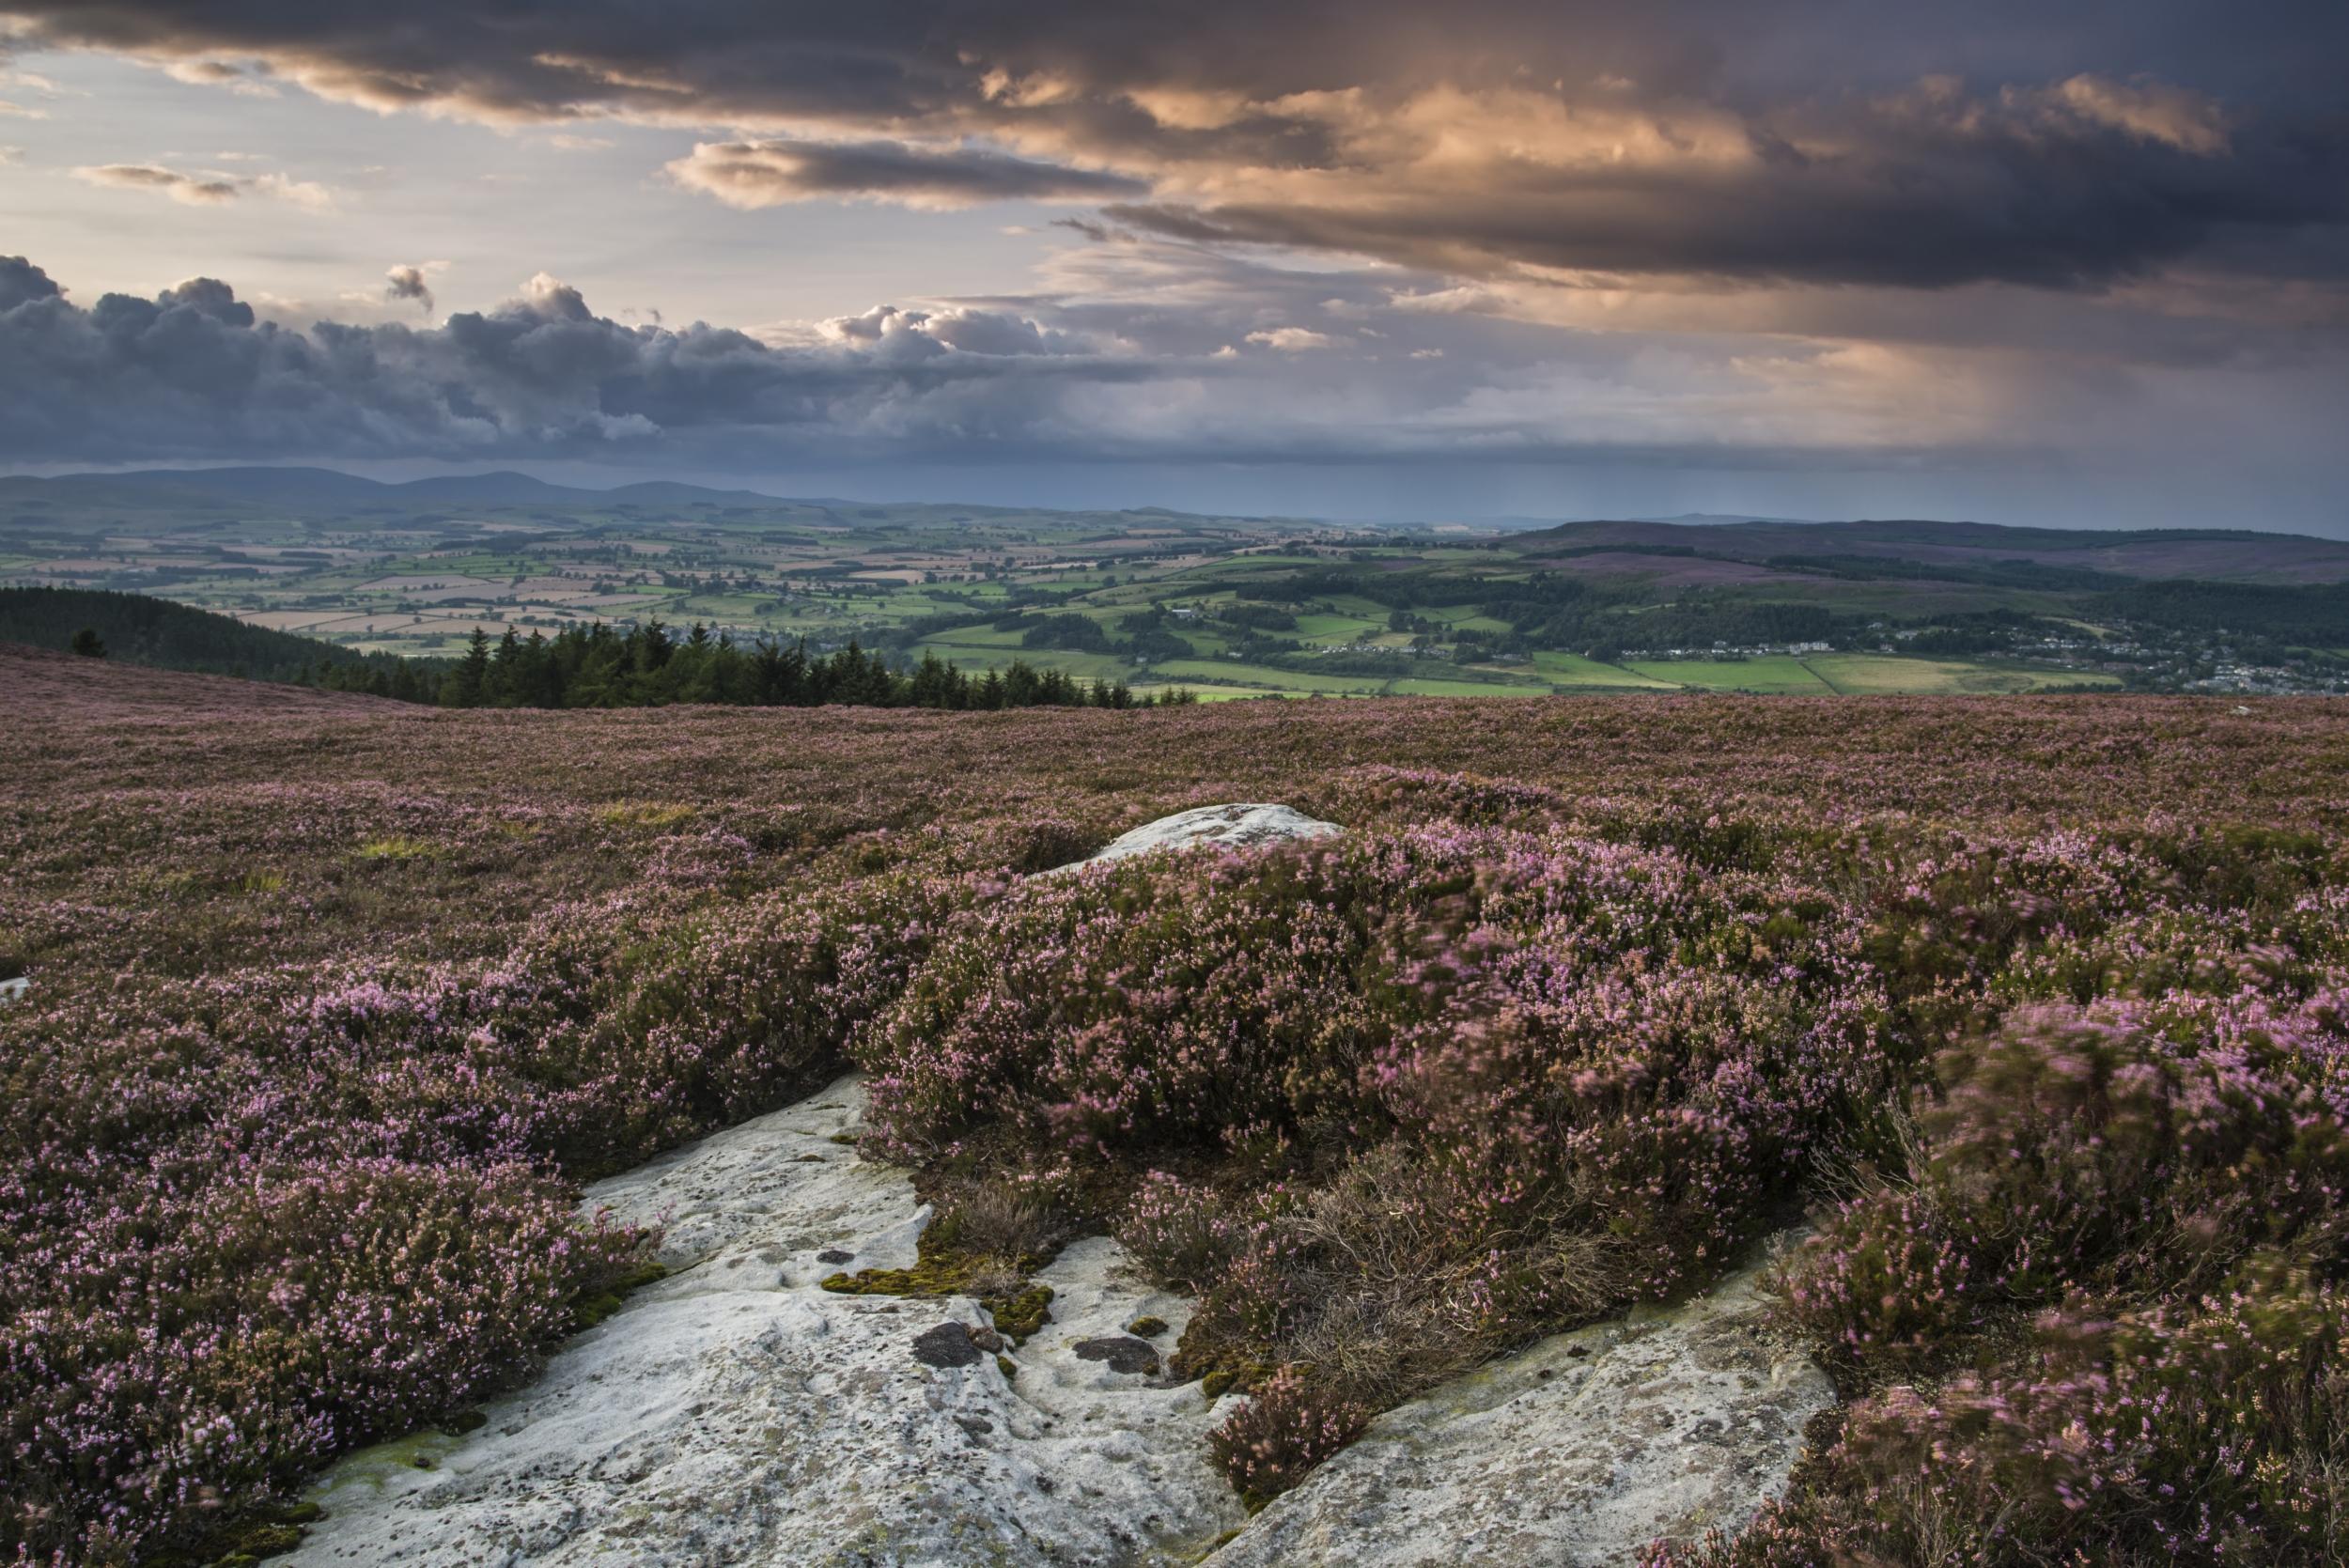 Serene landscapes dominate the view towards Rothbury